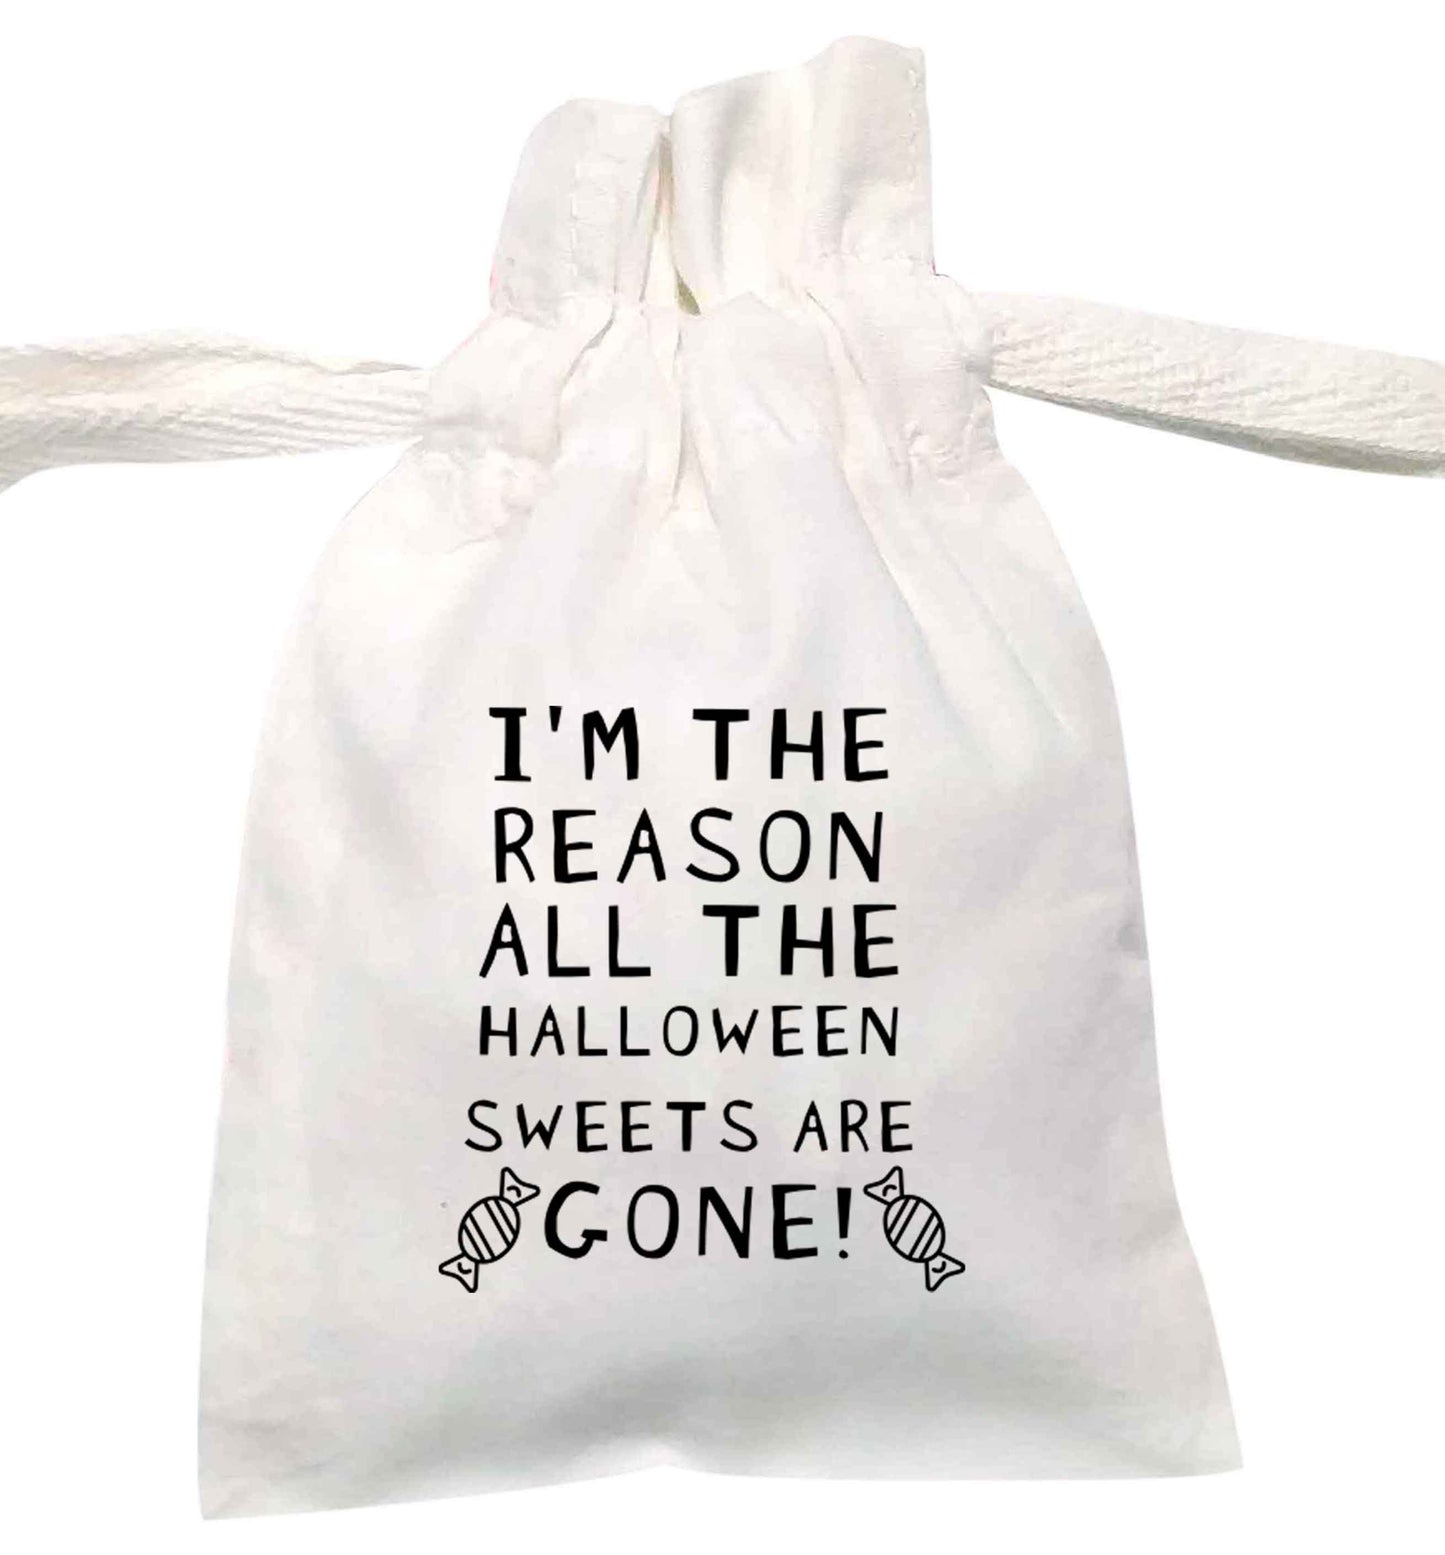 I'm the reason all of the halloween sweets are gone | XS - L | Pouch / Drawstring bag / Sack | Organic Cotton | Bulk discounts available!